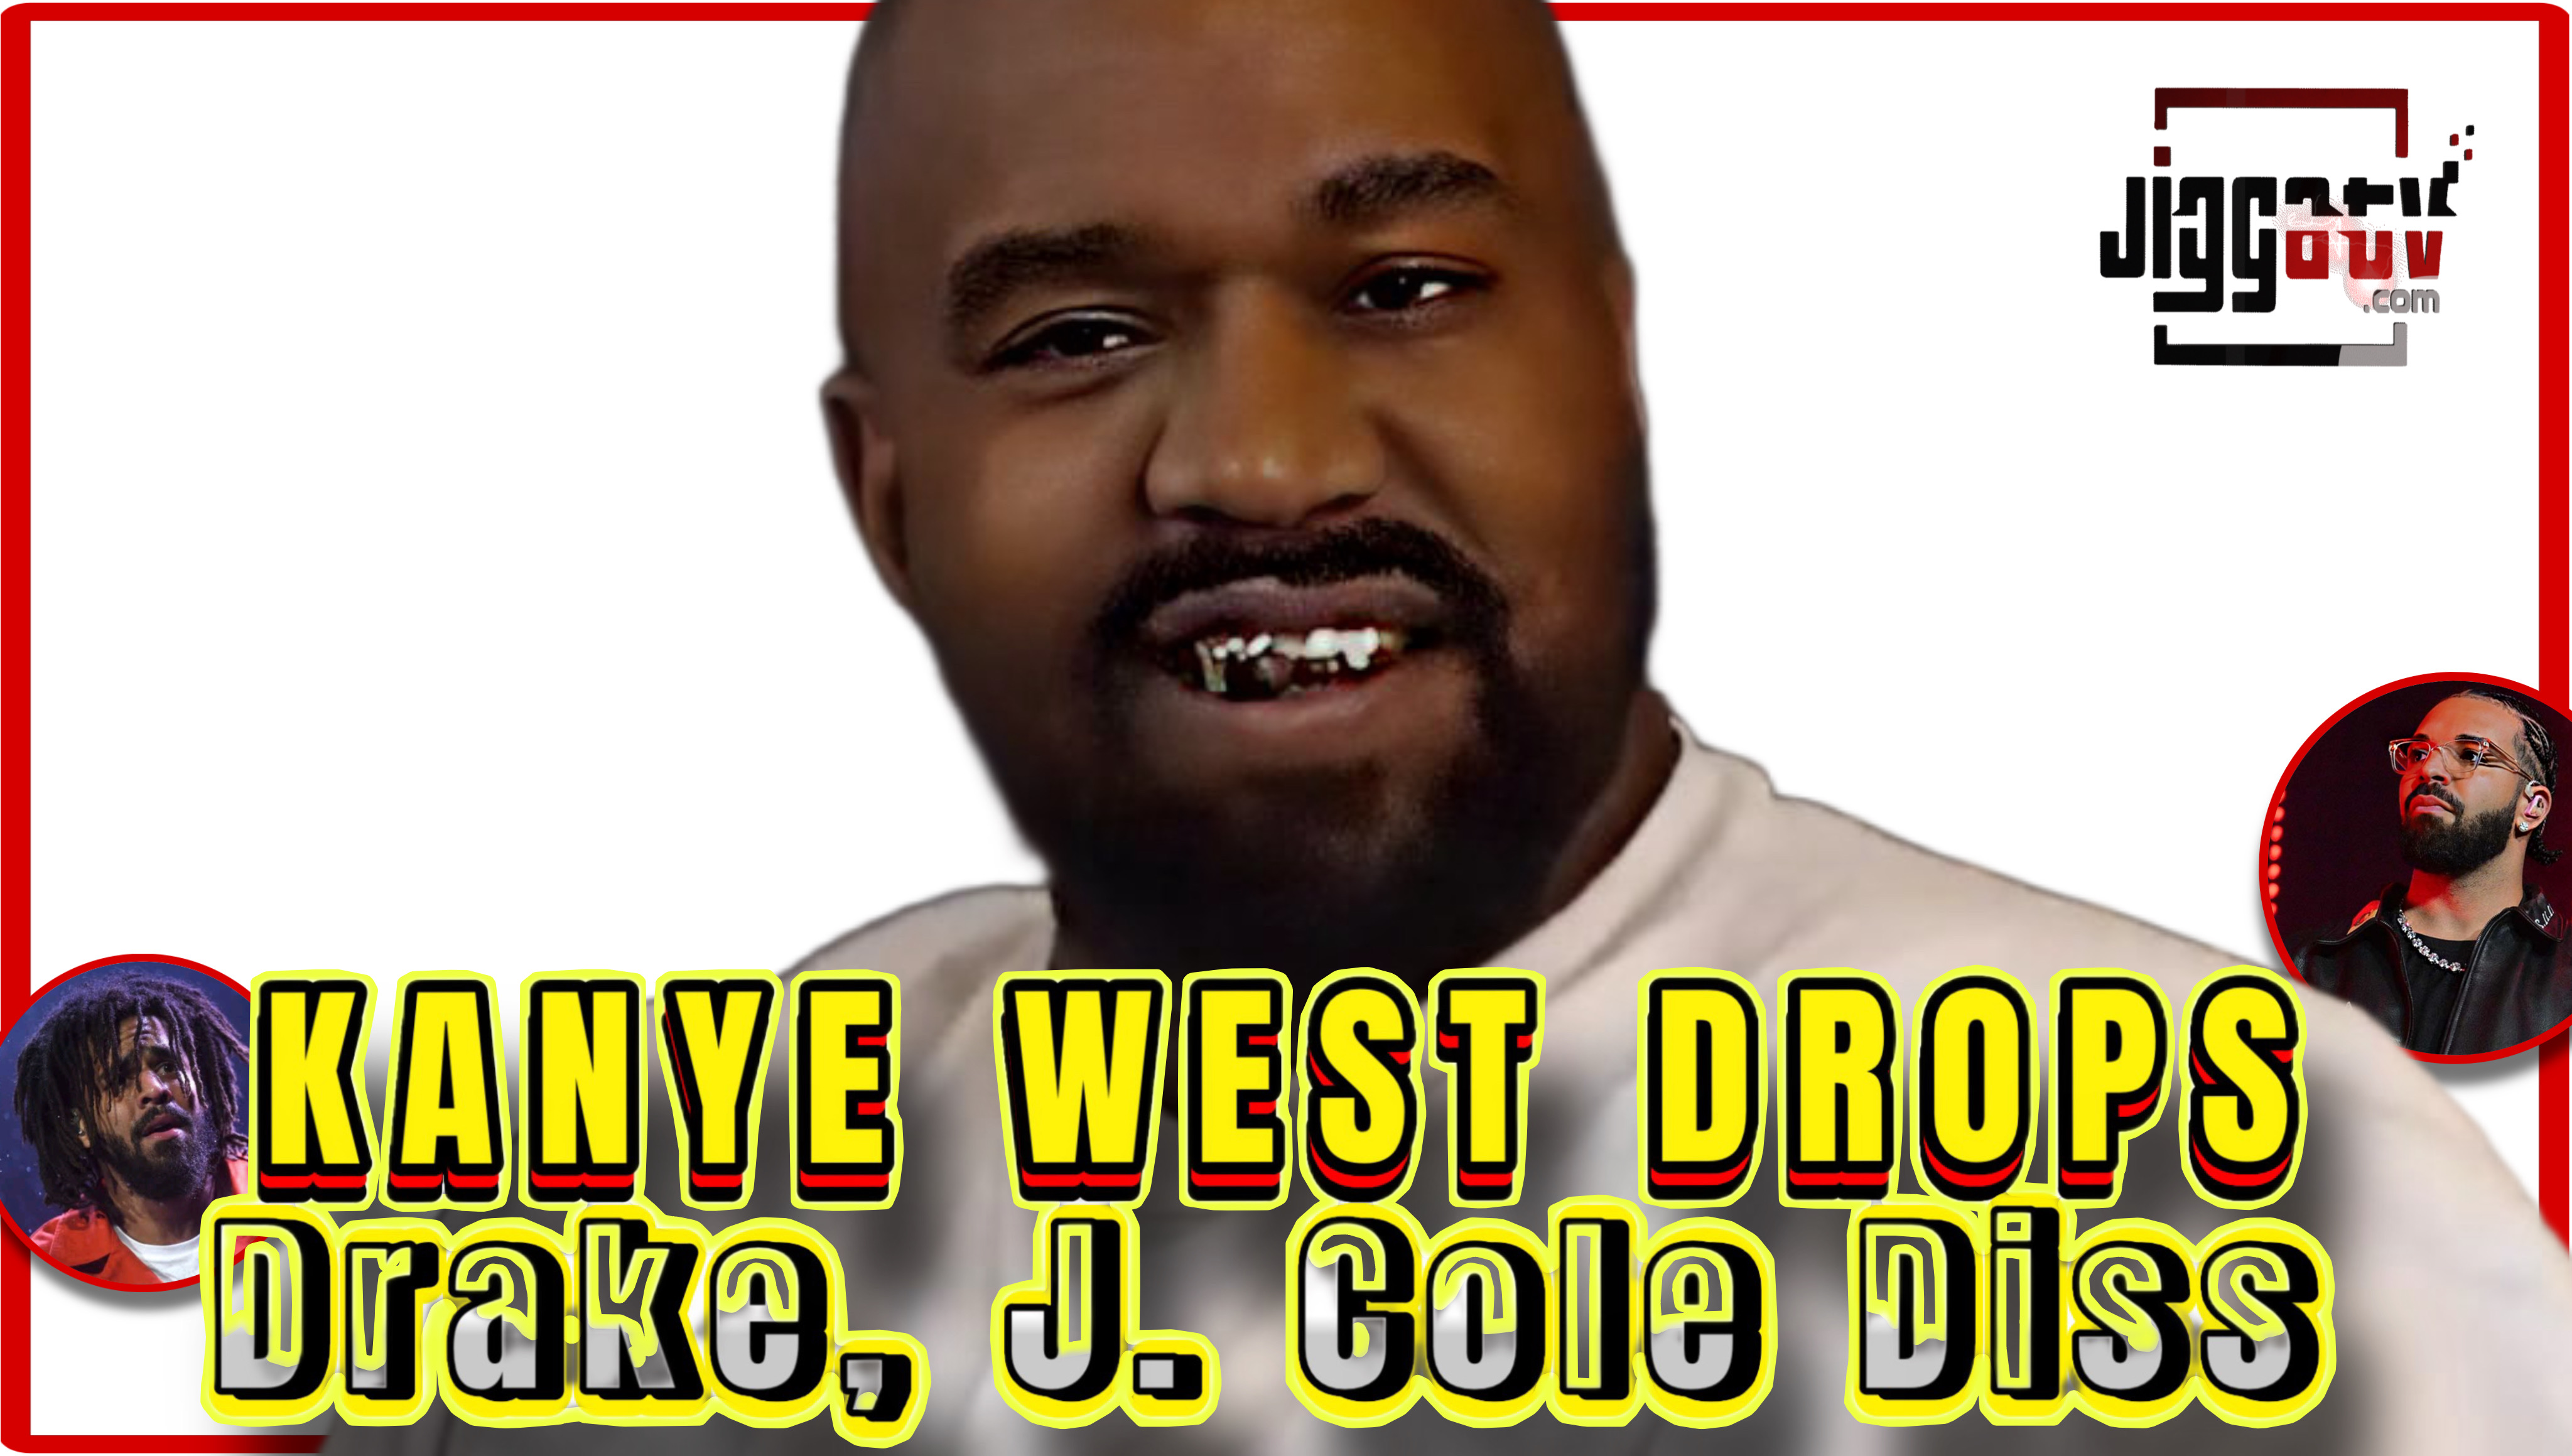 KANYE WEST DROPS DRAKE, J. COLE DISS ⁉️ YE, jumped straight into rap beef ...